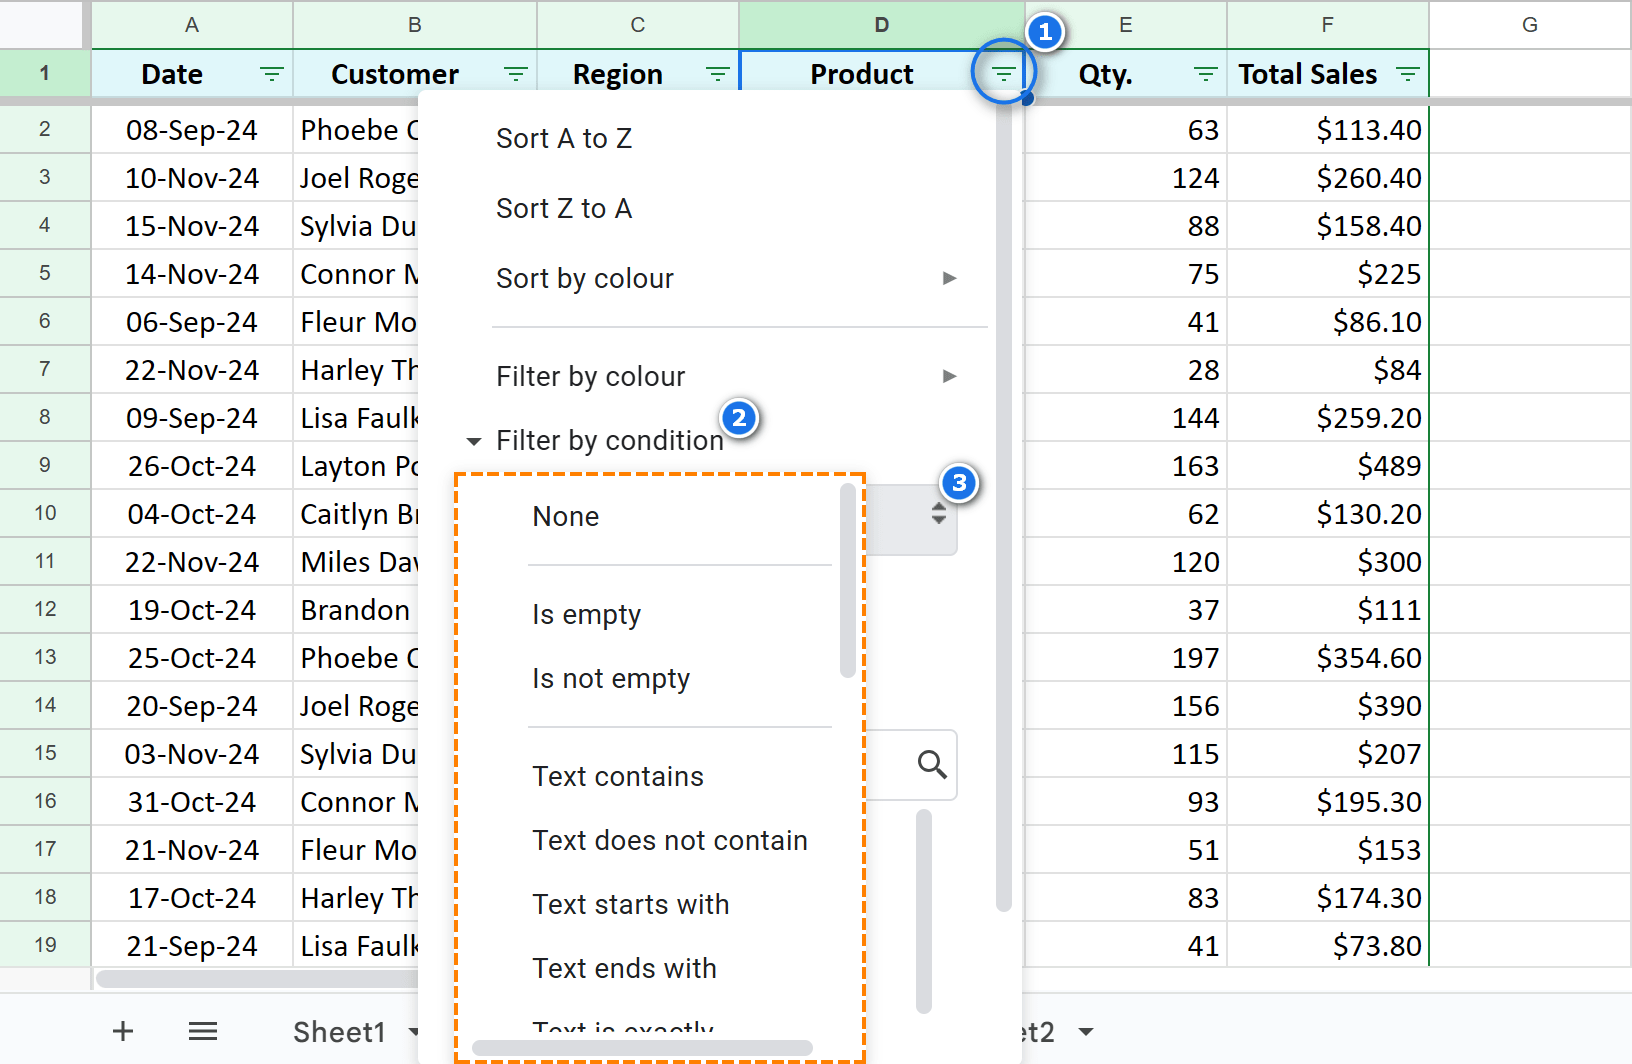 See all filter conditions available in Google Sheets.